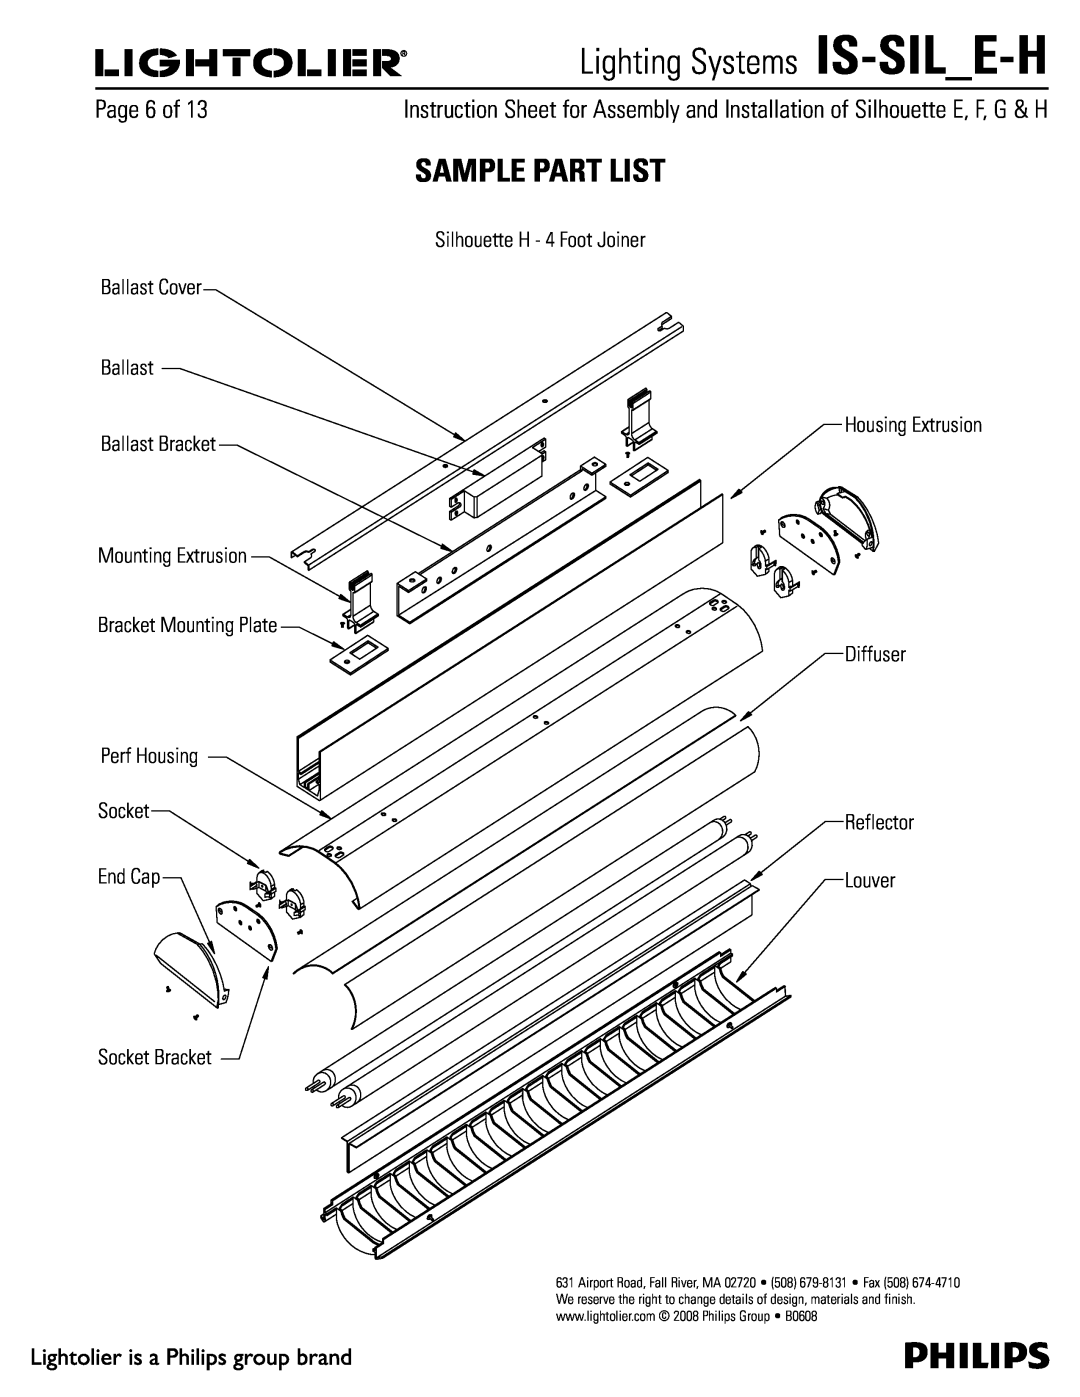 Lightolier IS-SIL_E-H manual Sample Part List, Lighting Systems IS-SILE-H, 1BHFPG, Louver 